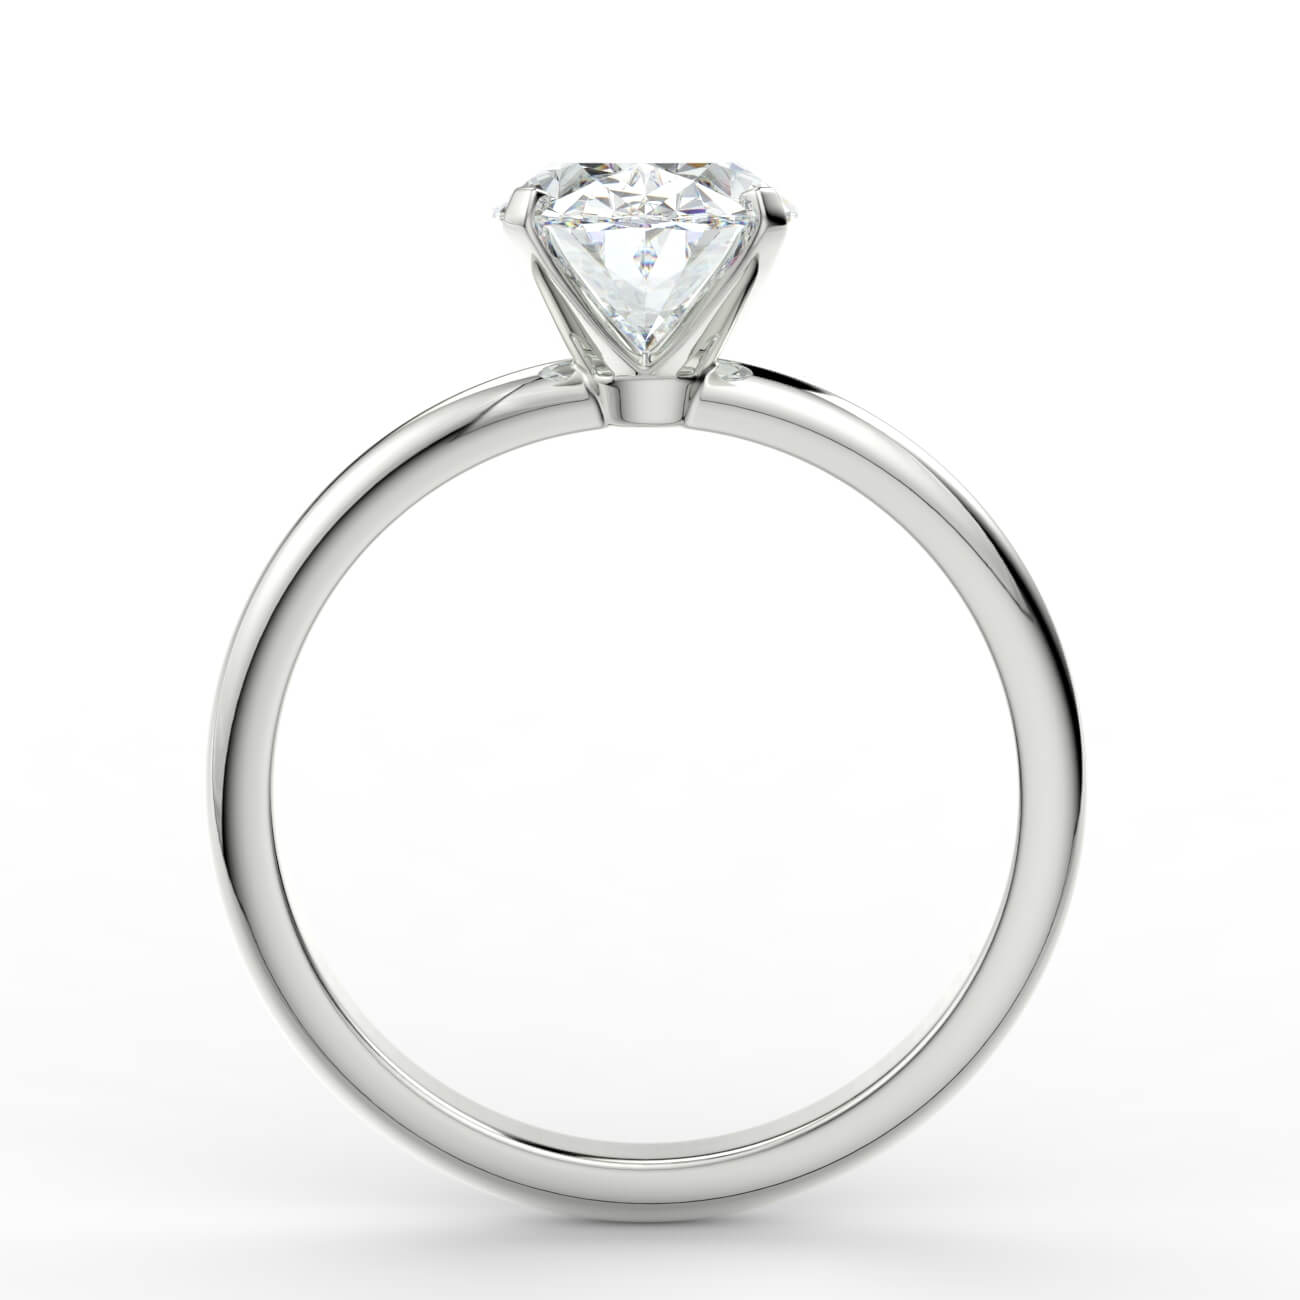 Tapering Solitaire Engagement Ring in white gold – Australian Diamond Network